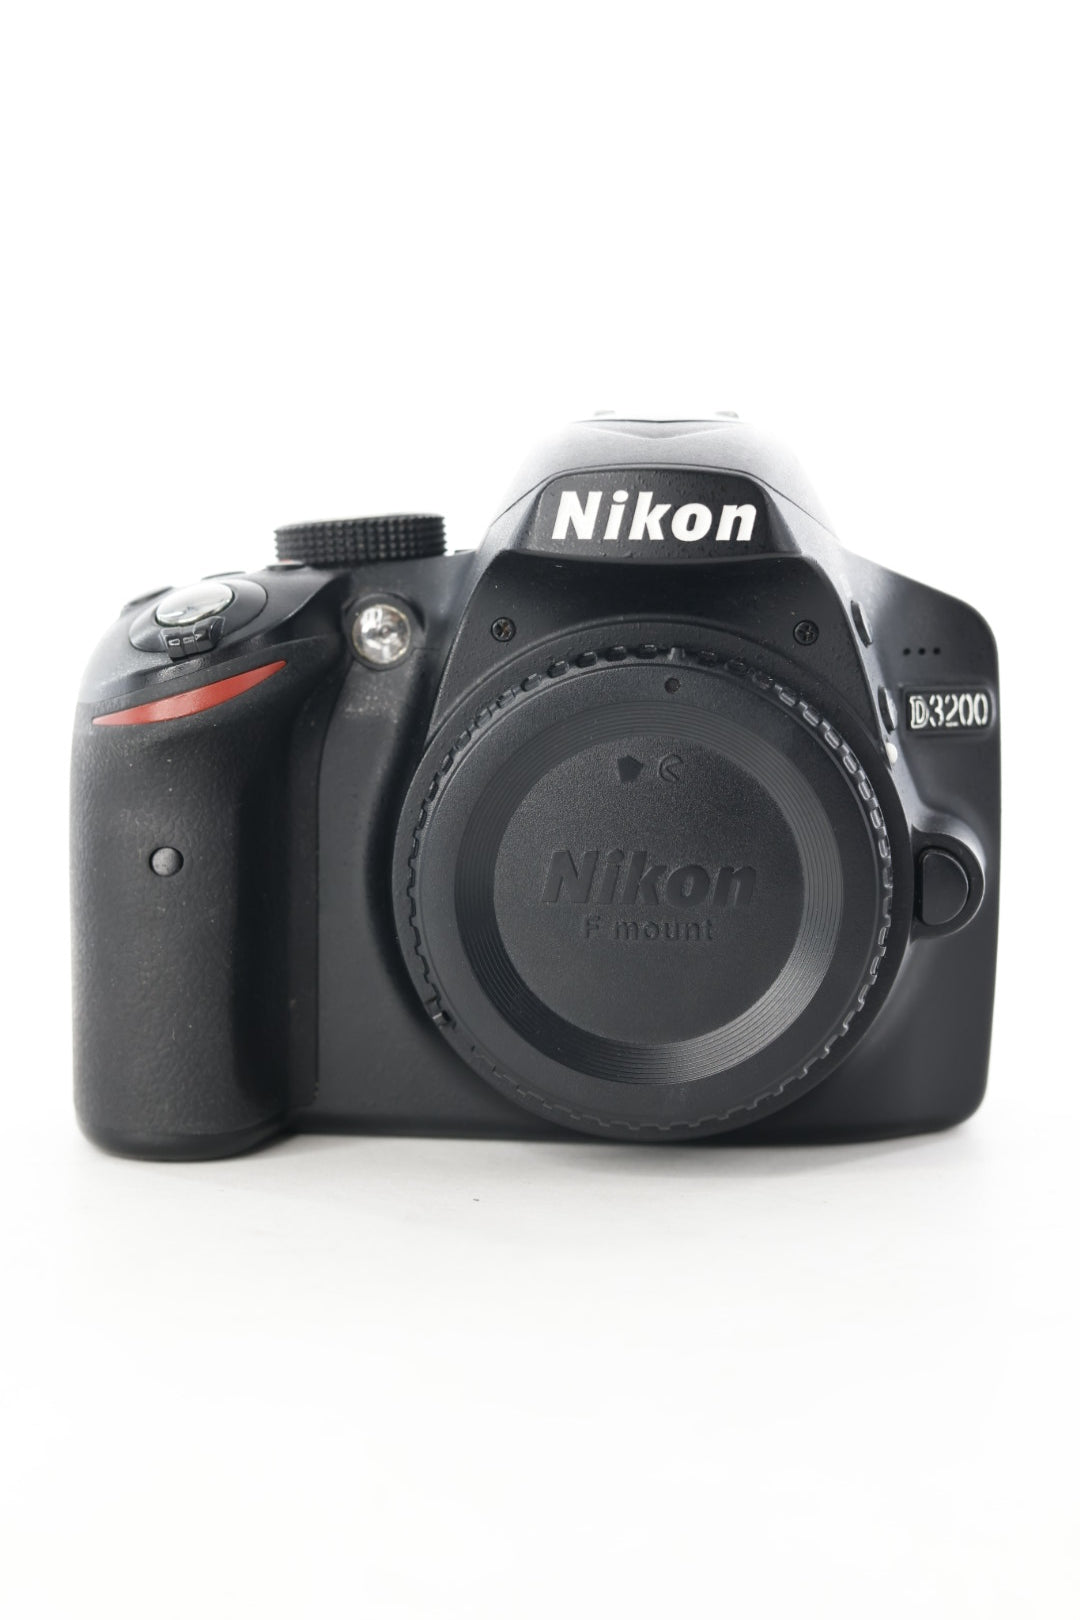 Nikon D3200/79585 Body Only, Used (For Parts)